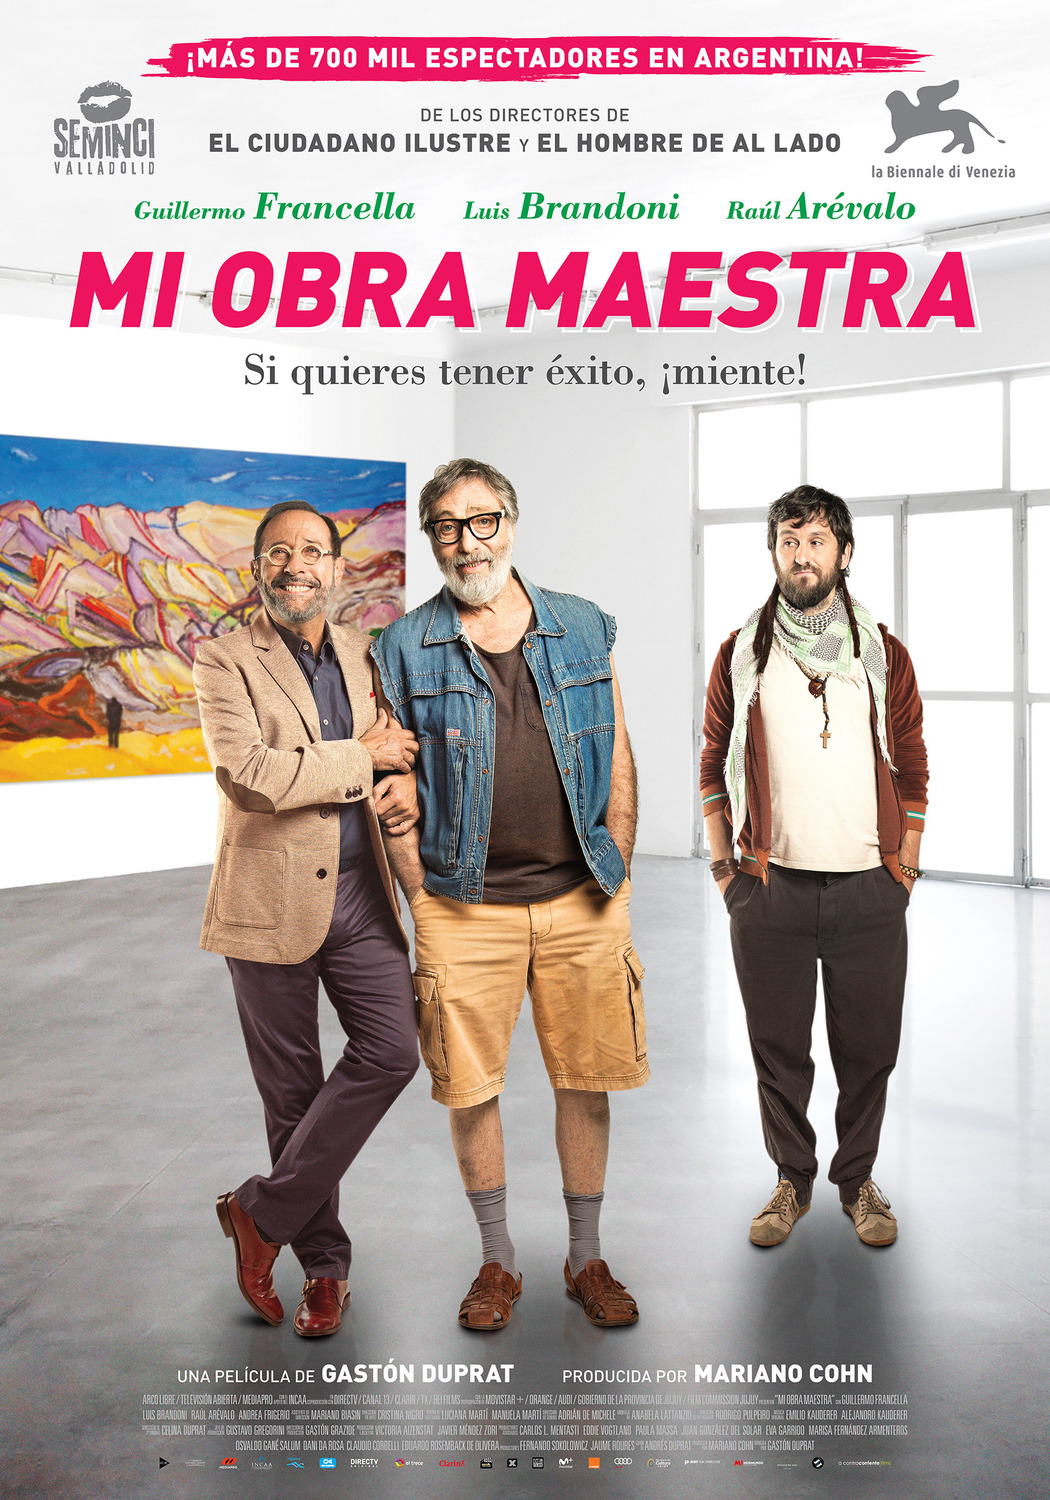 Extra Large Movie Poster Image for Mi obra maestra (#2 of 2)